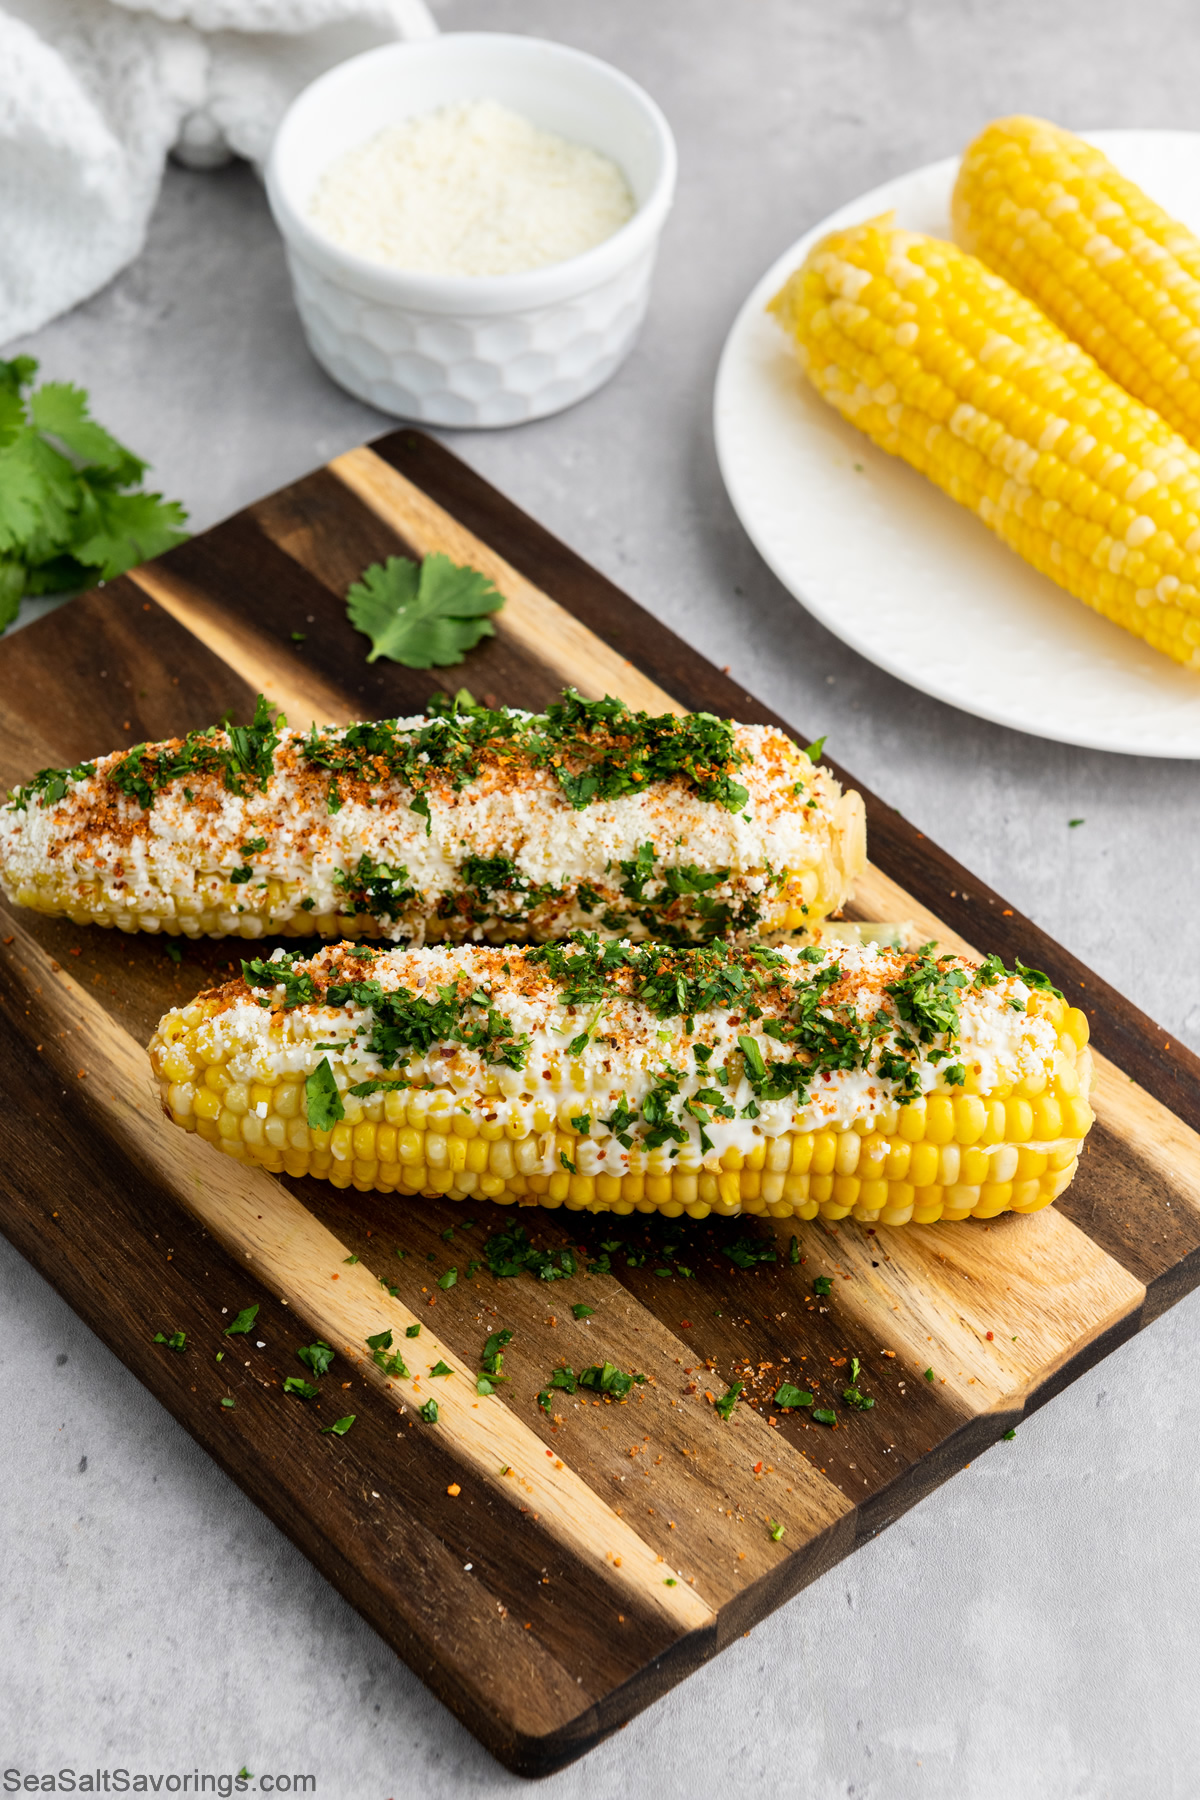 two corn on the cobs with seasons and toppings on a cutting board